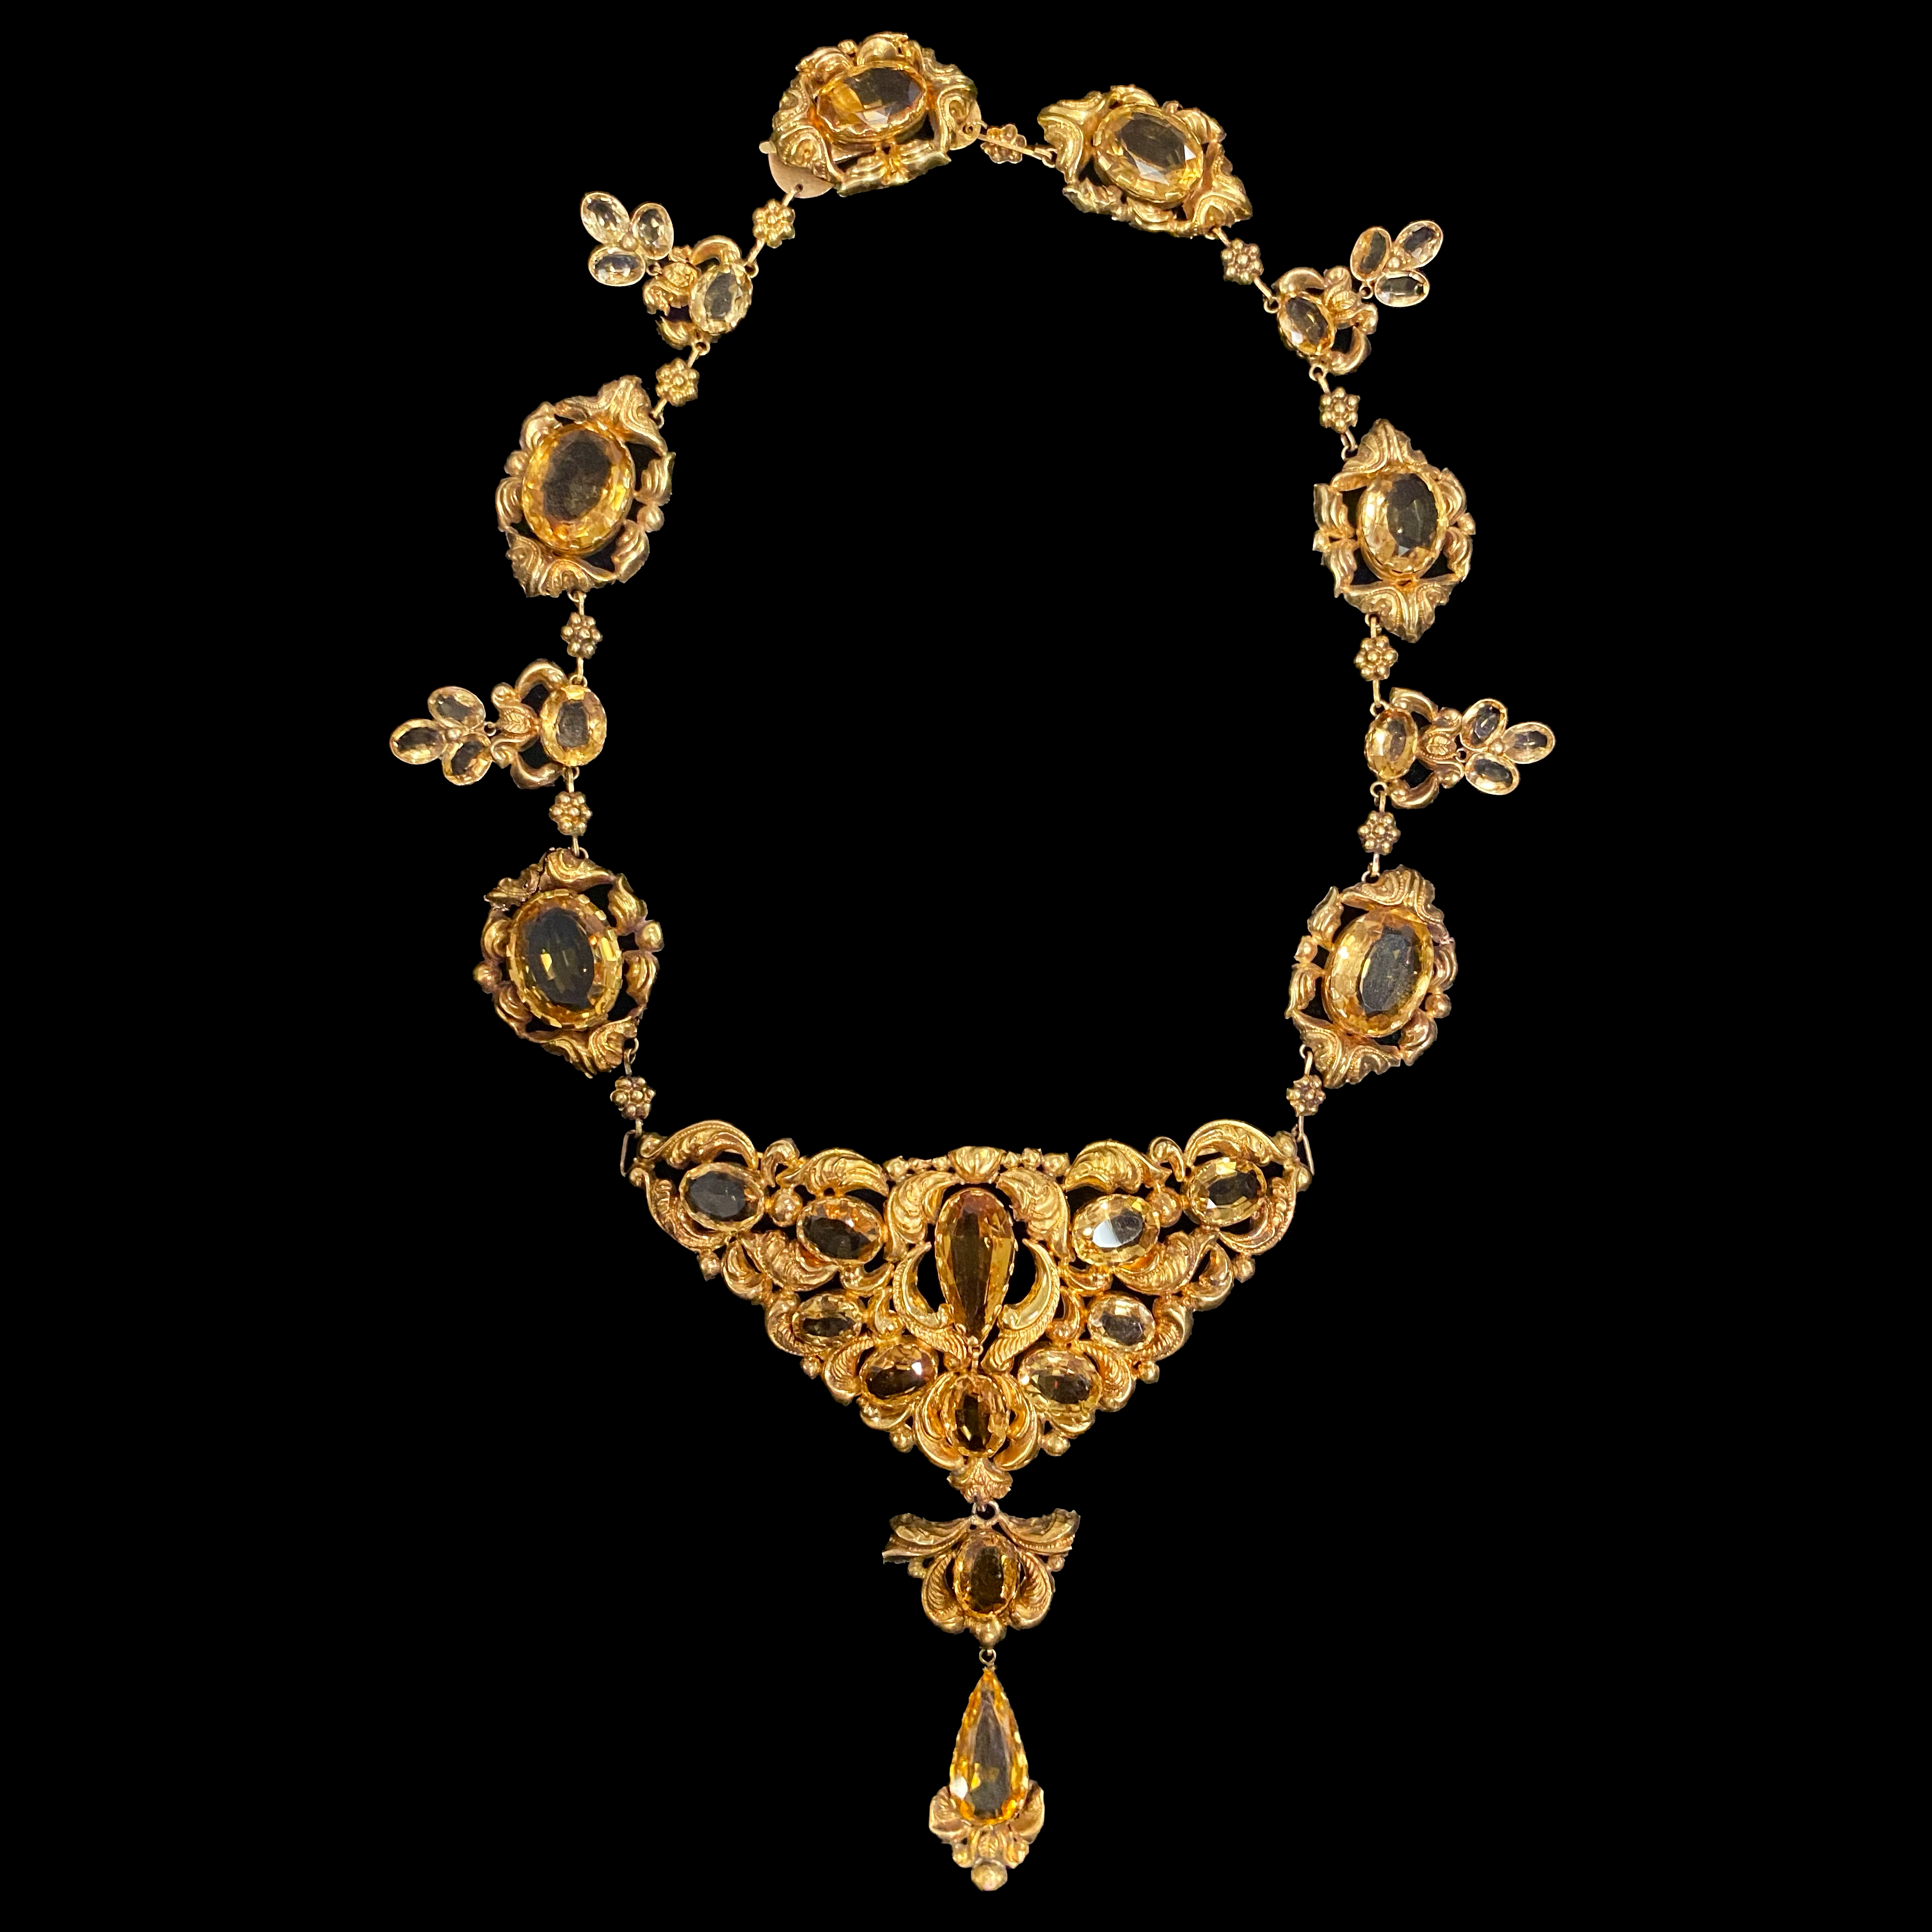 example of jewelry from the Victorian era